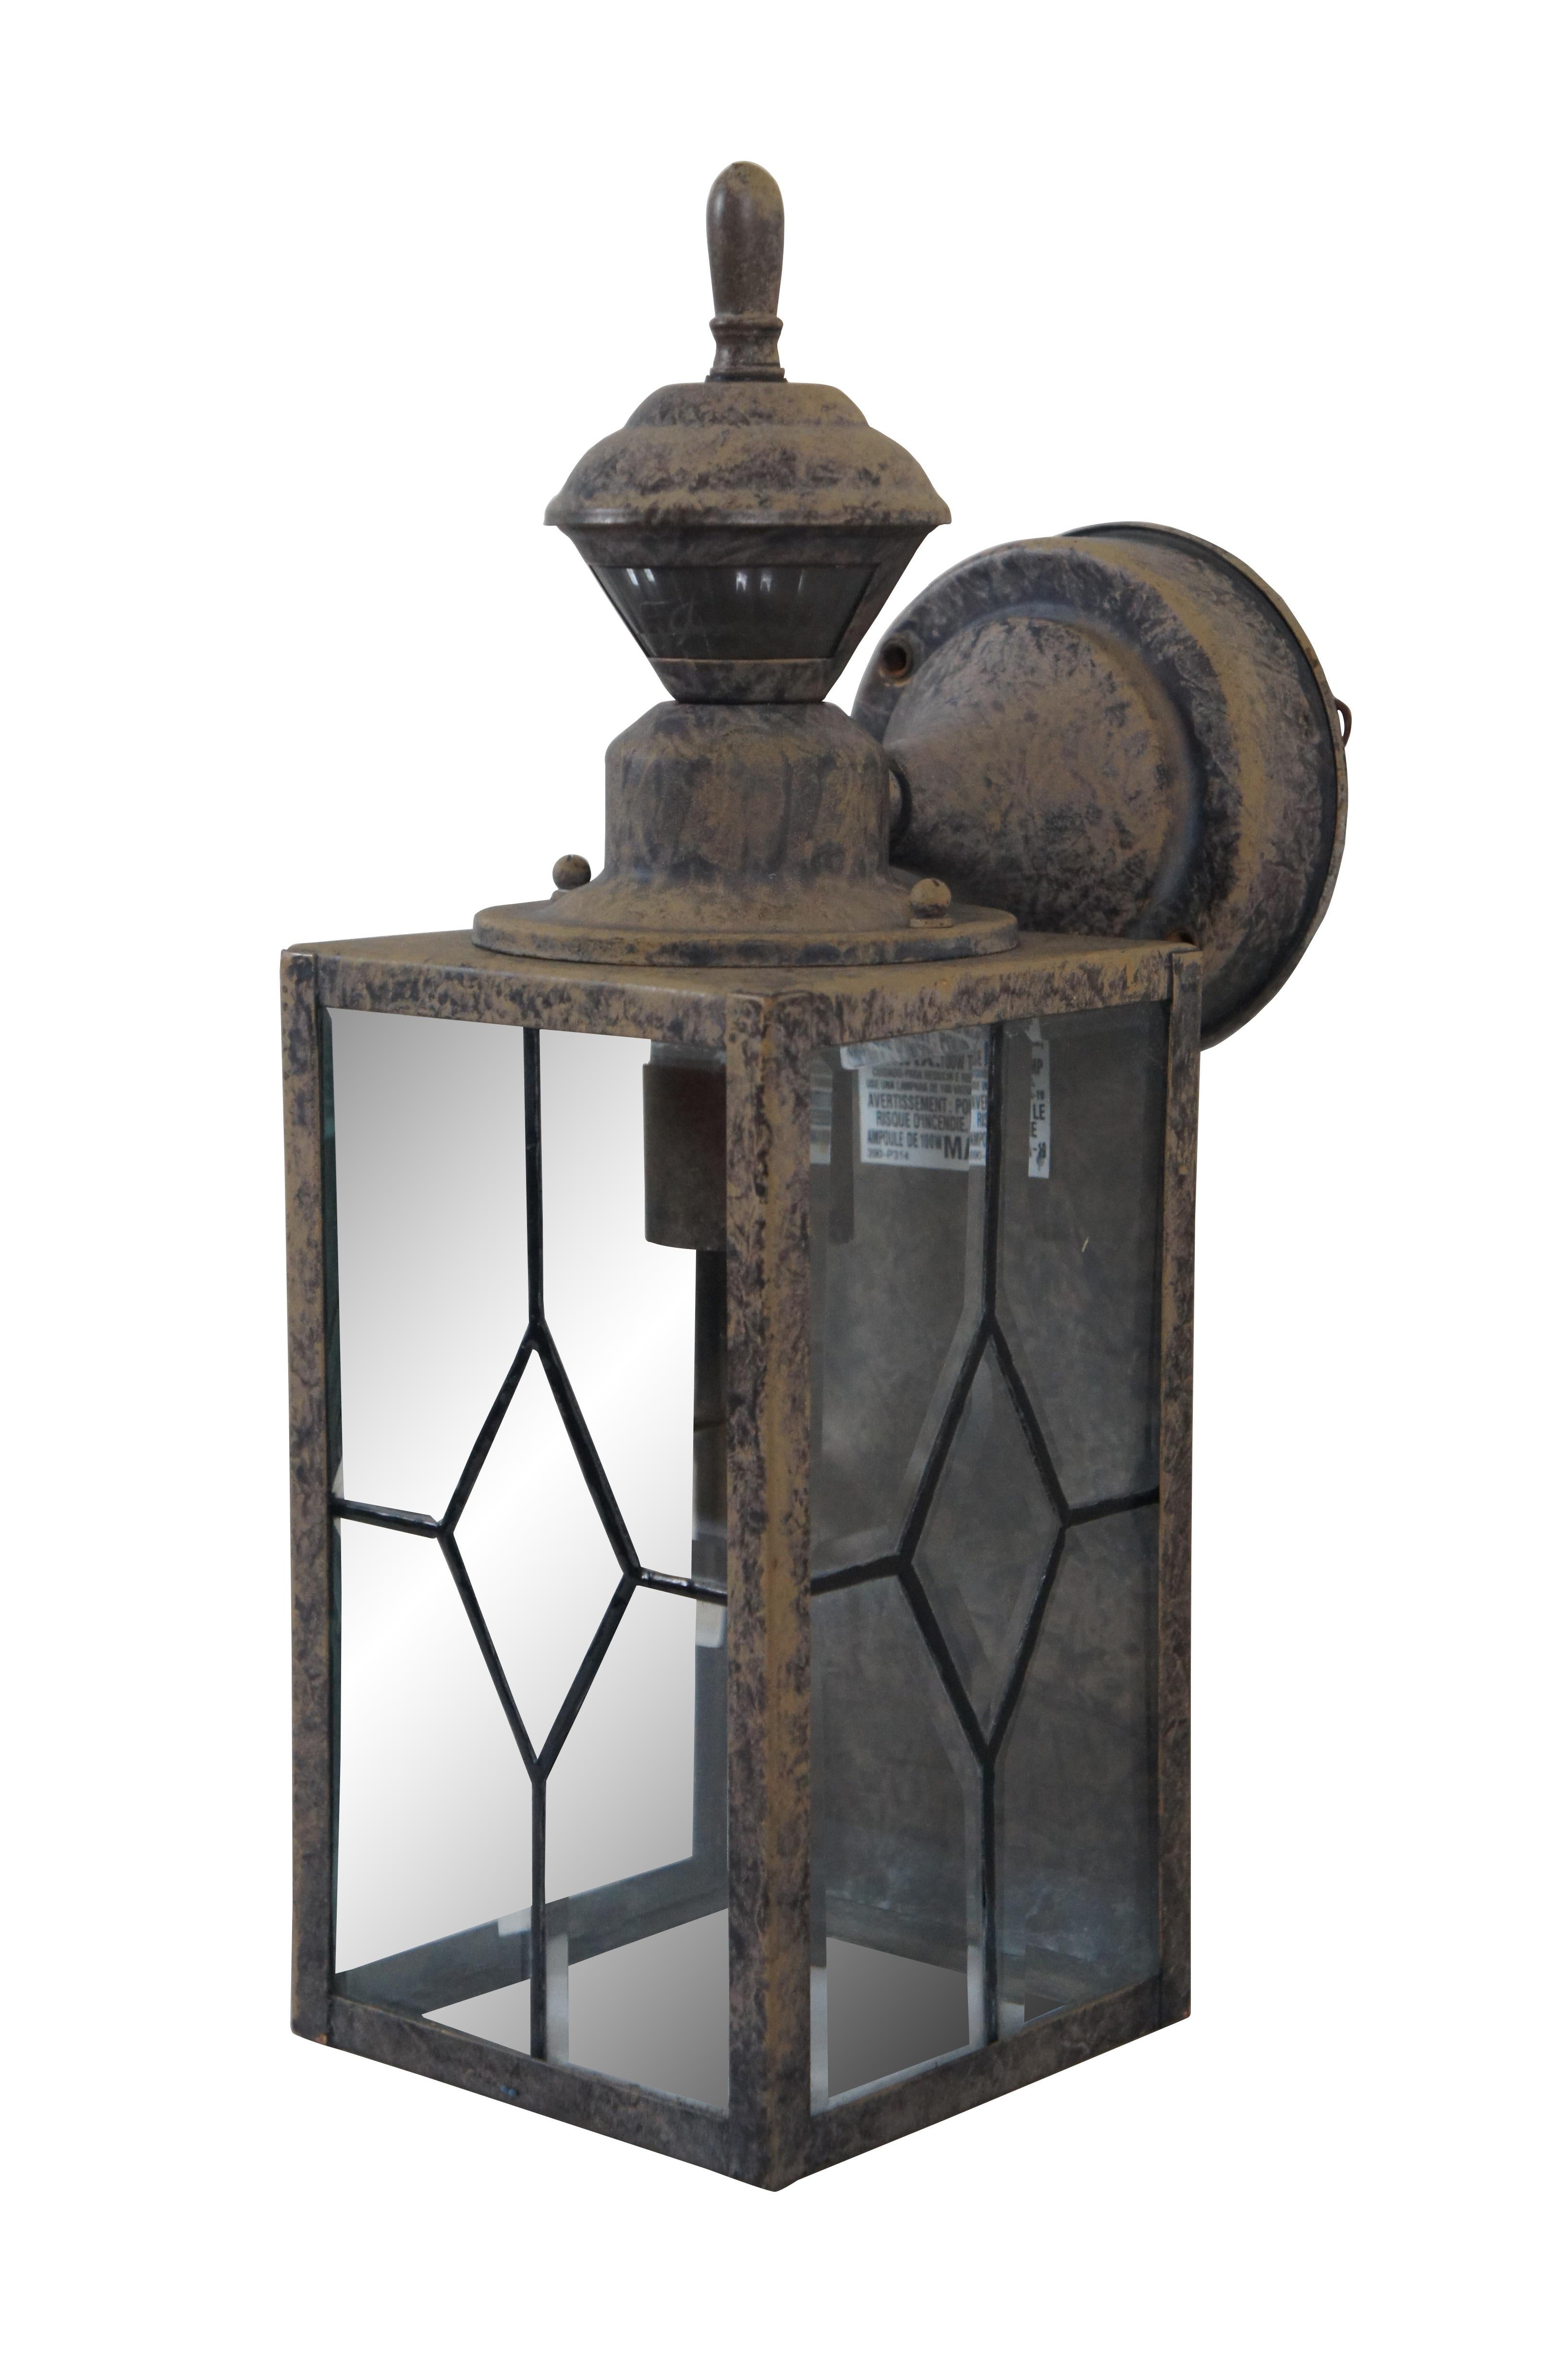 Heath Zenith SL-4151-B Single Light High Outdoor Wall Sconce - Motion Sensor Activated. Diamond pane faux leaded beveled glass panels in a mottled black and beige  painted metal housing.

Features:
- Detection range up to 30 feet
- Rotatable sensor